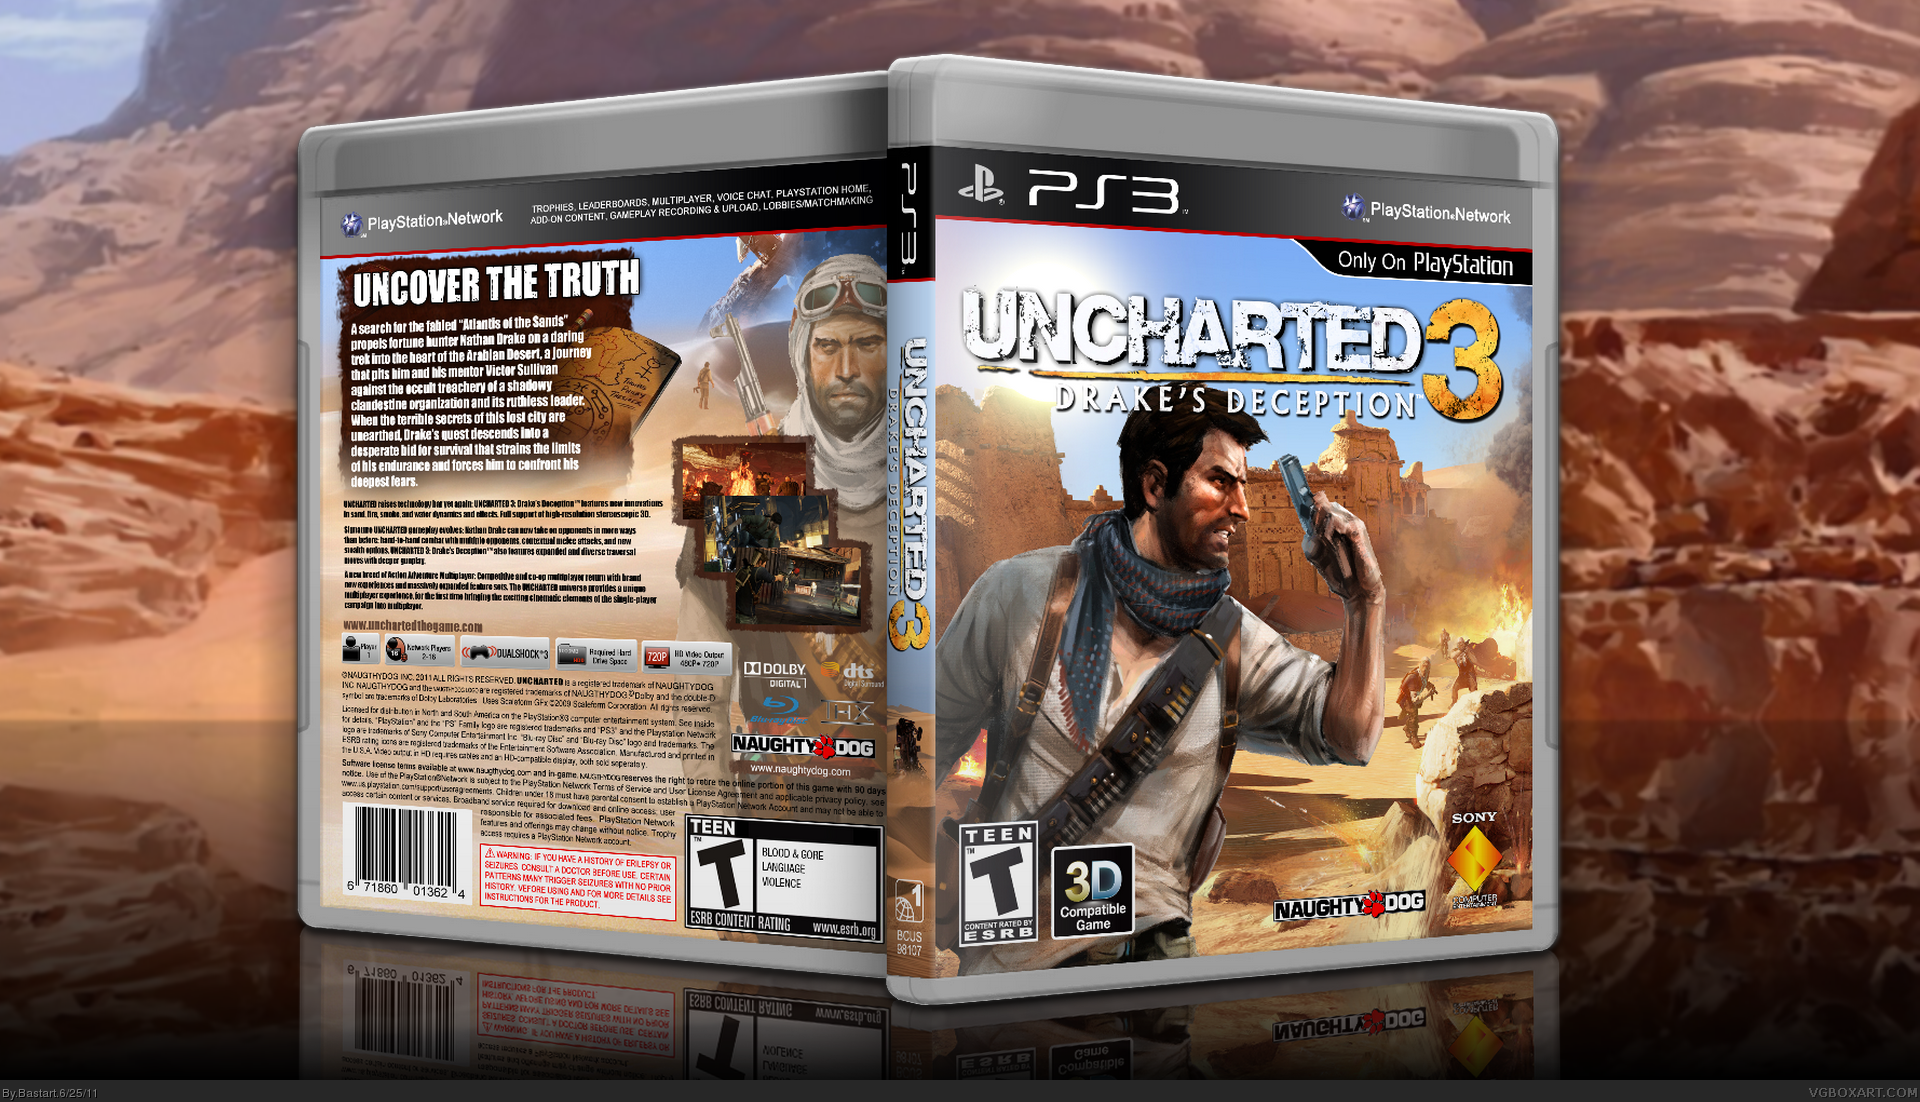 uncharted 3 pc game kickass